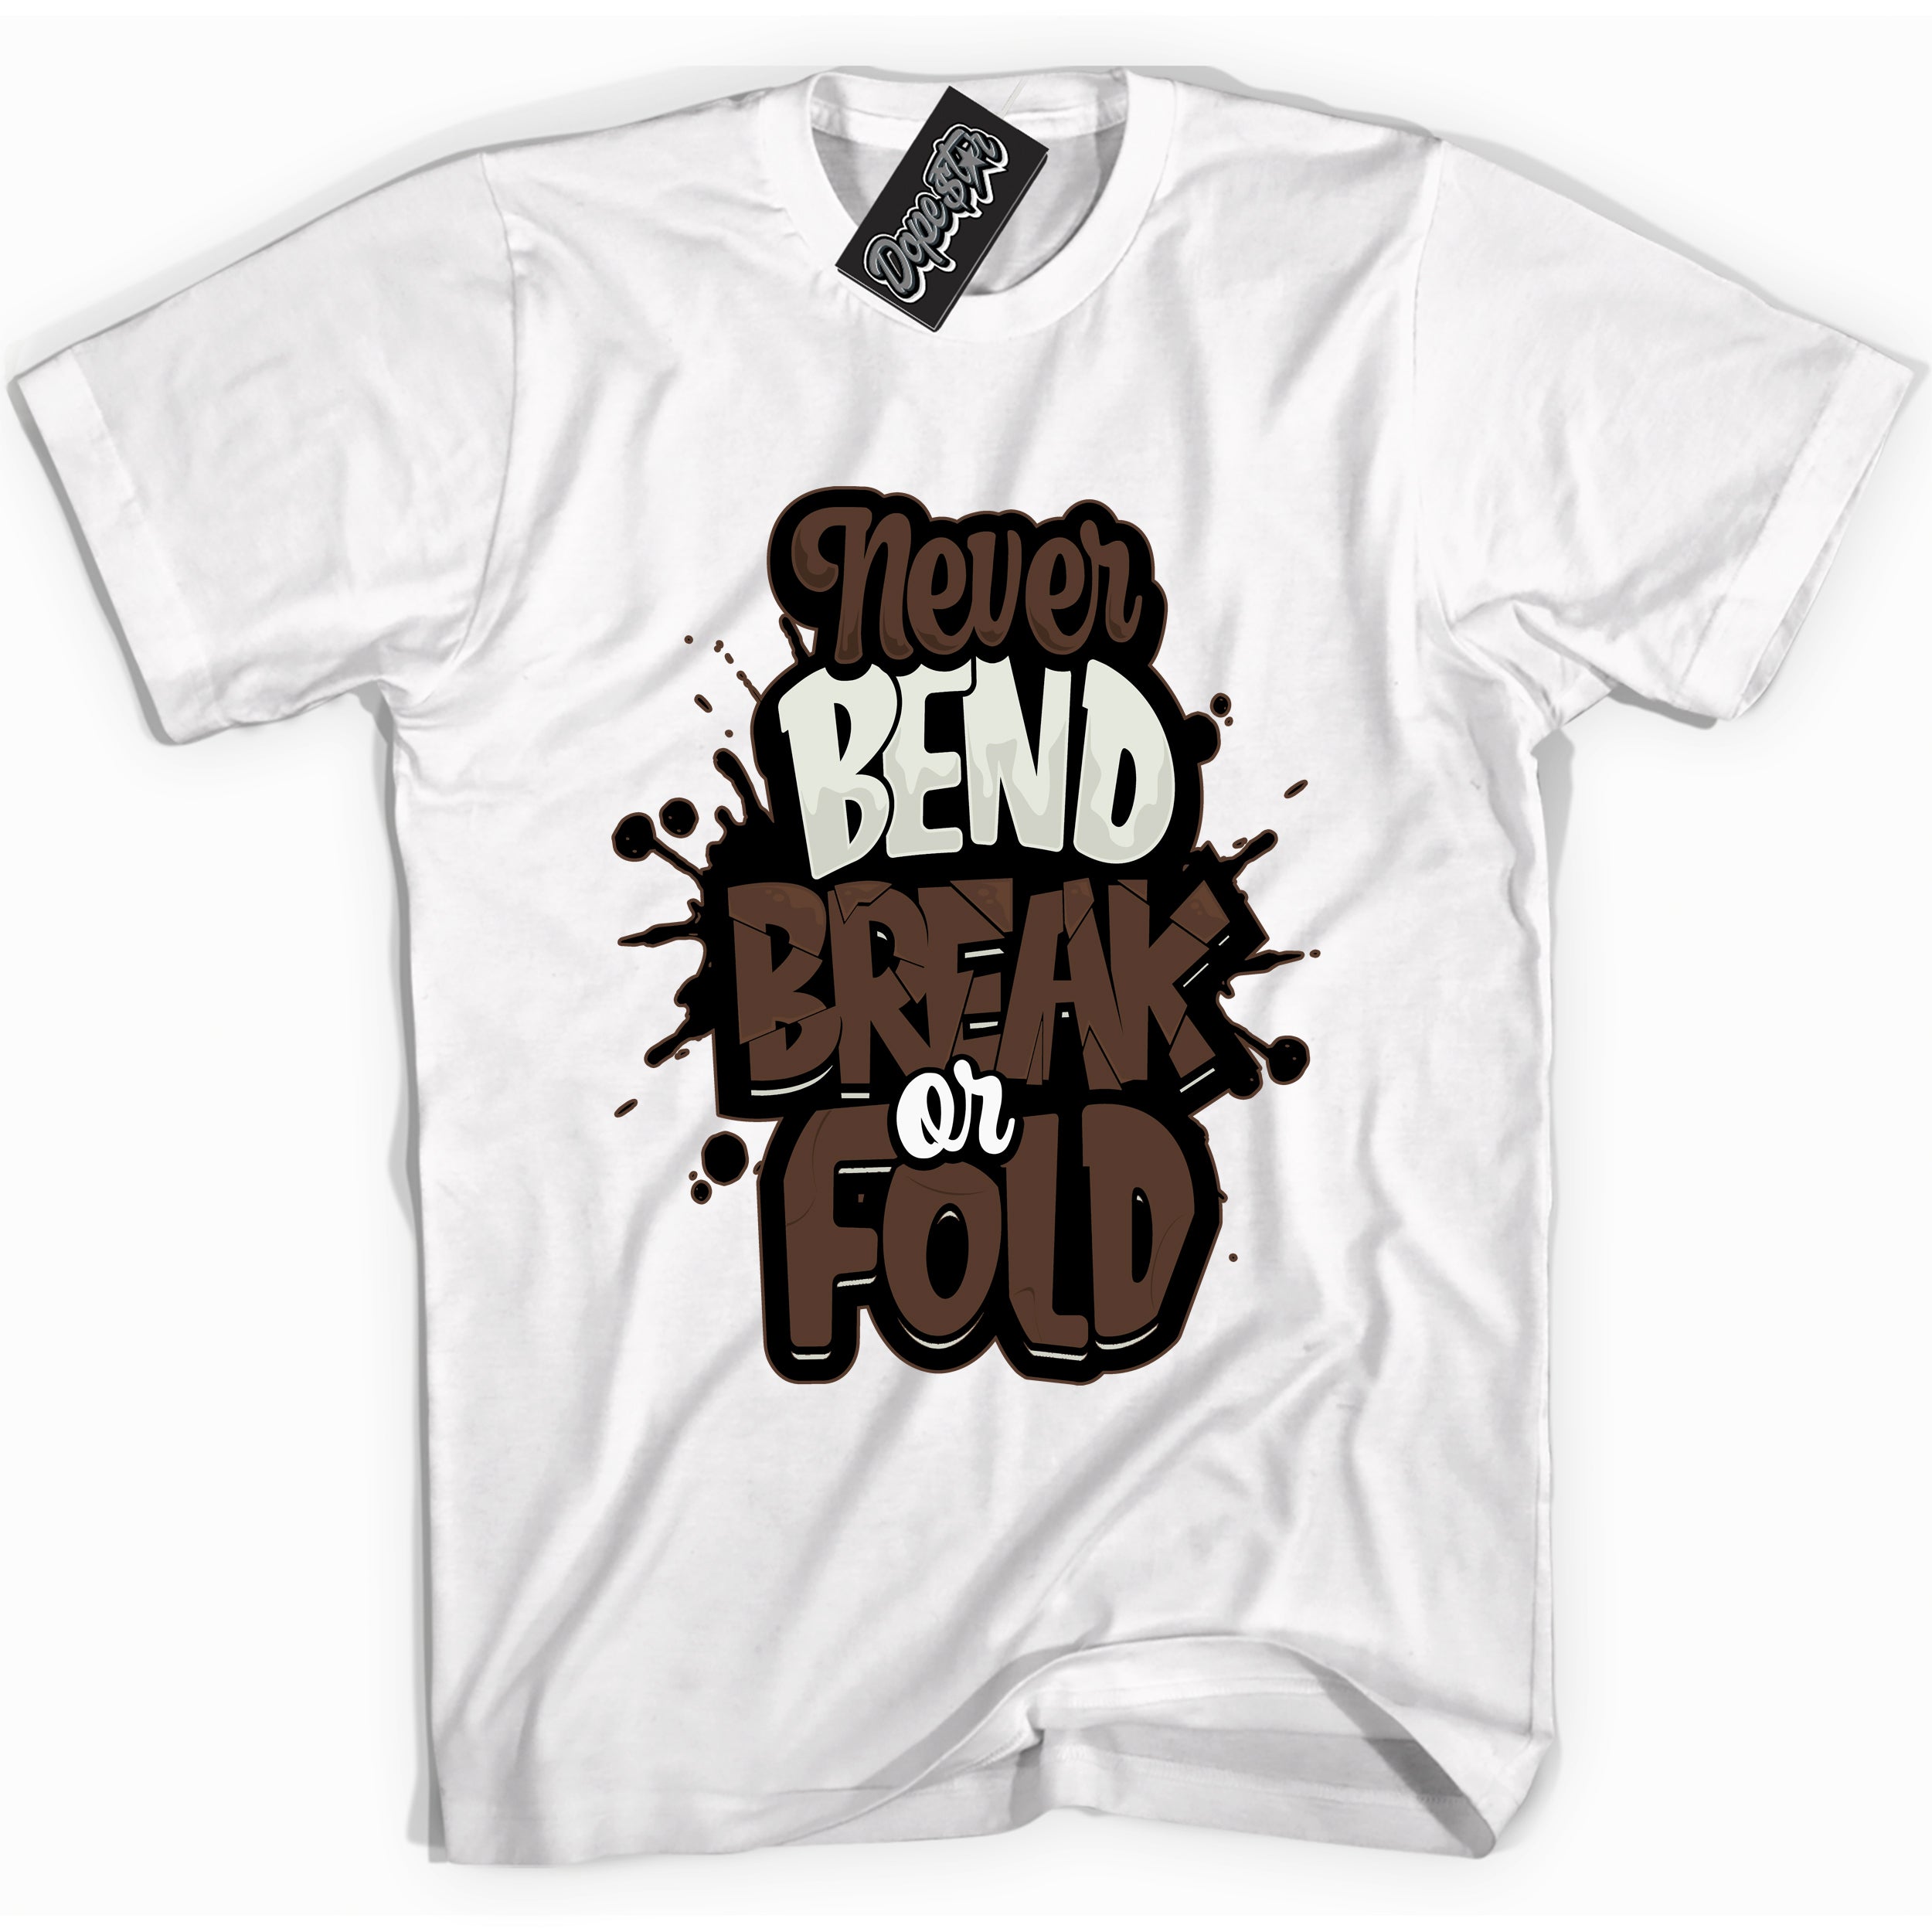 Cool White graphic tee with “ Never Bend Break Or Fold ” design, that perfectly matches Palomino 1s sneakers 